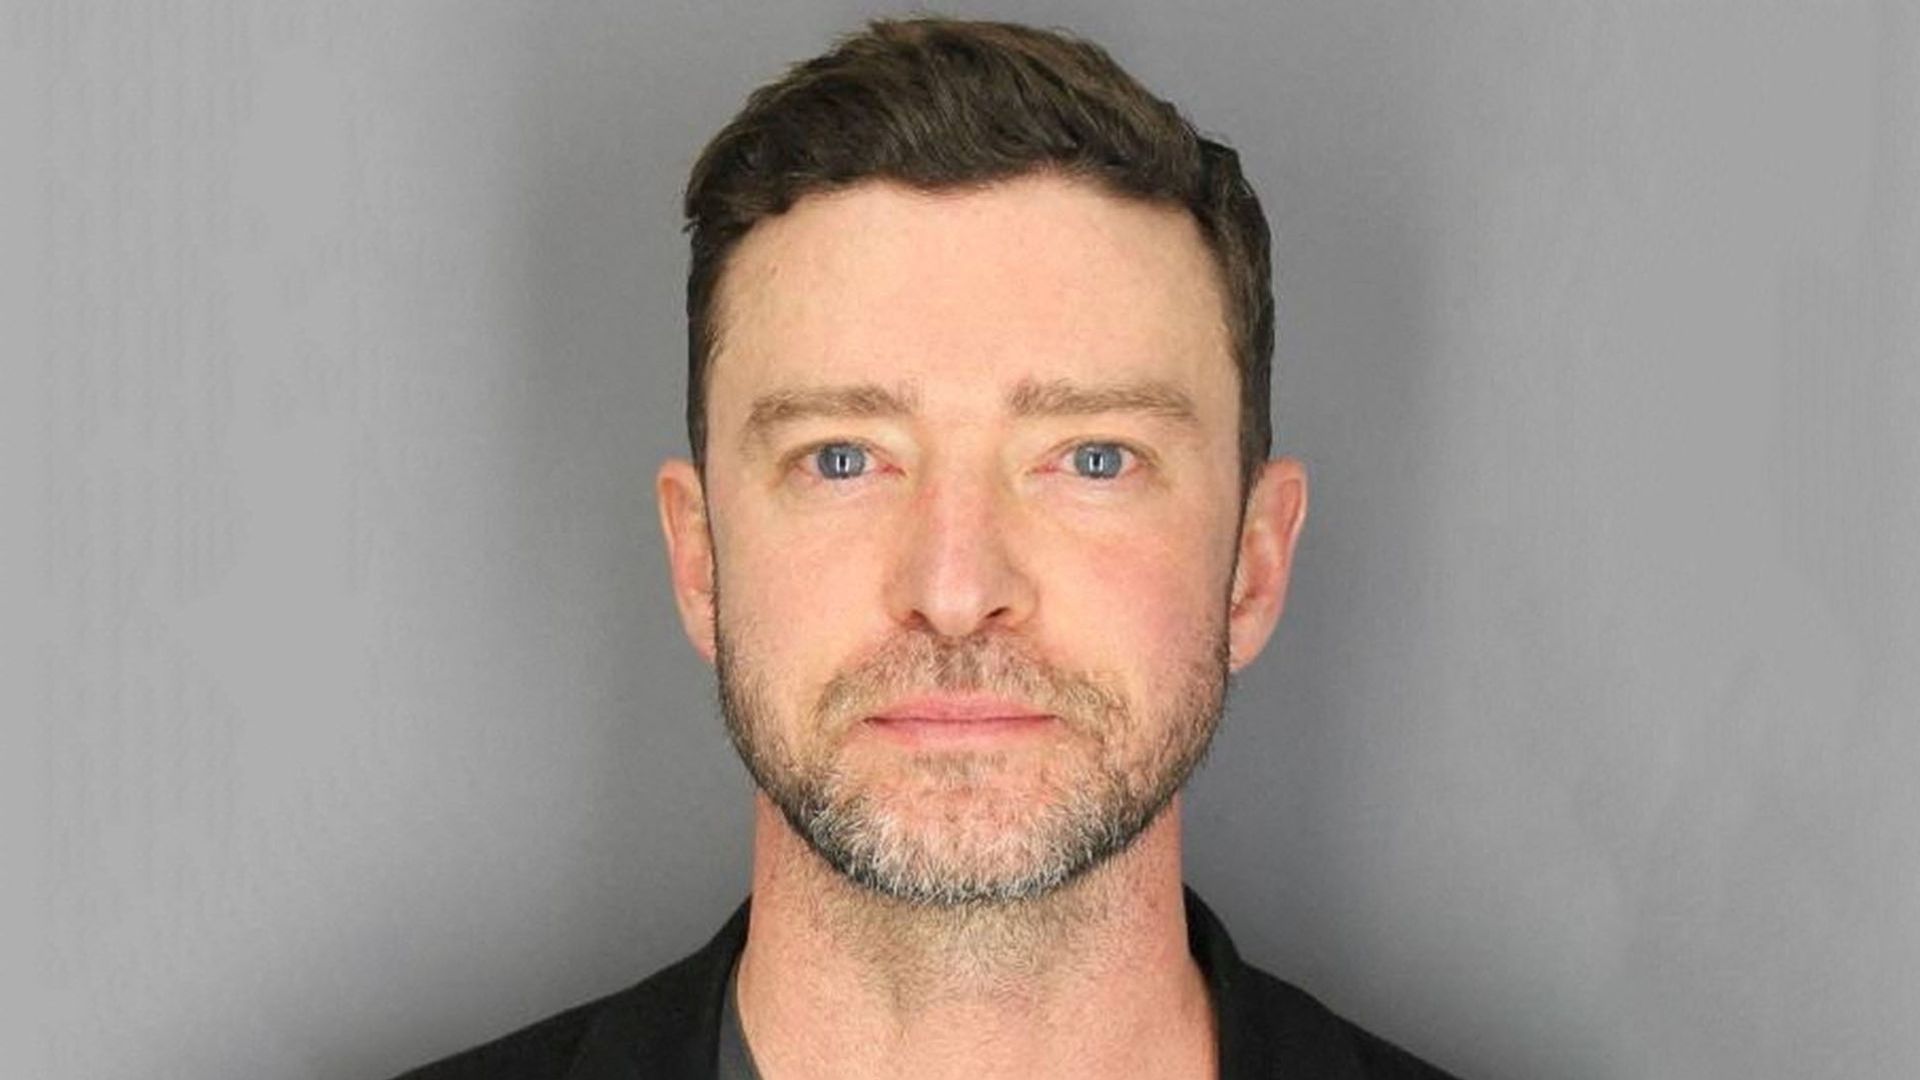 Justin Timberlake 'was not intoxicated when arrested for drink-driving'